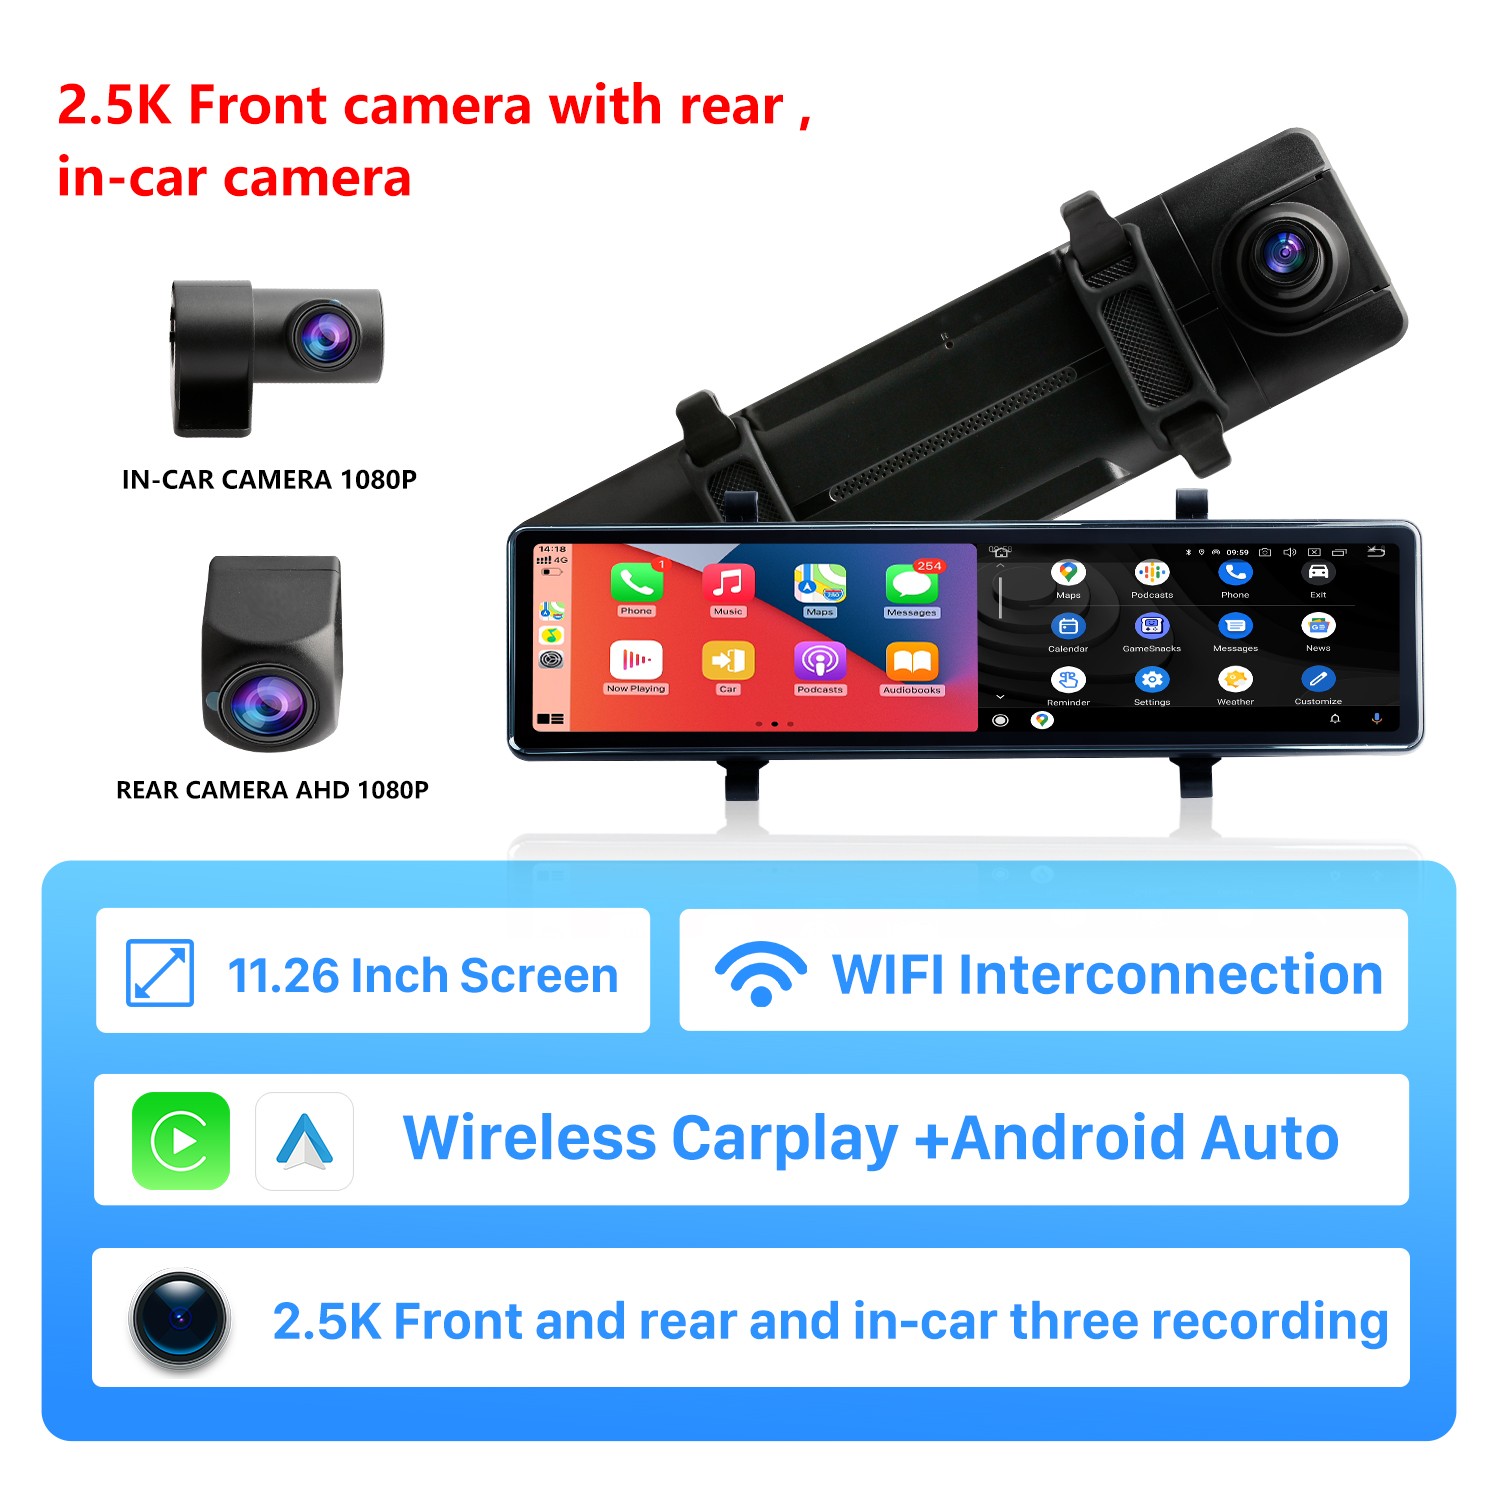 Hikity Mirror Dash Camera Wireless Apple CarPlay Android Auto, 1080P Backup  Camera Rear View Mirror with 11.26 inch Smart Mirror Screen, 64G TF Card 